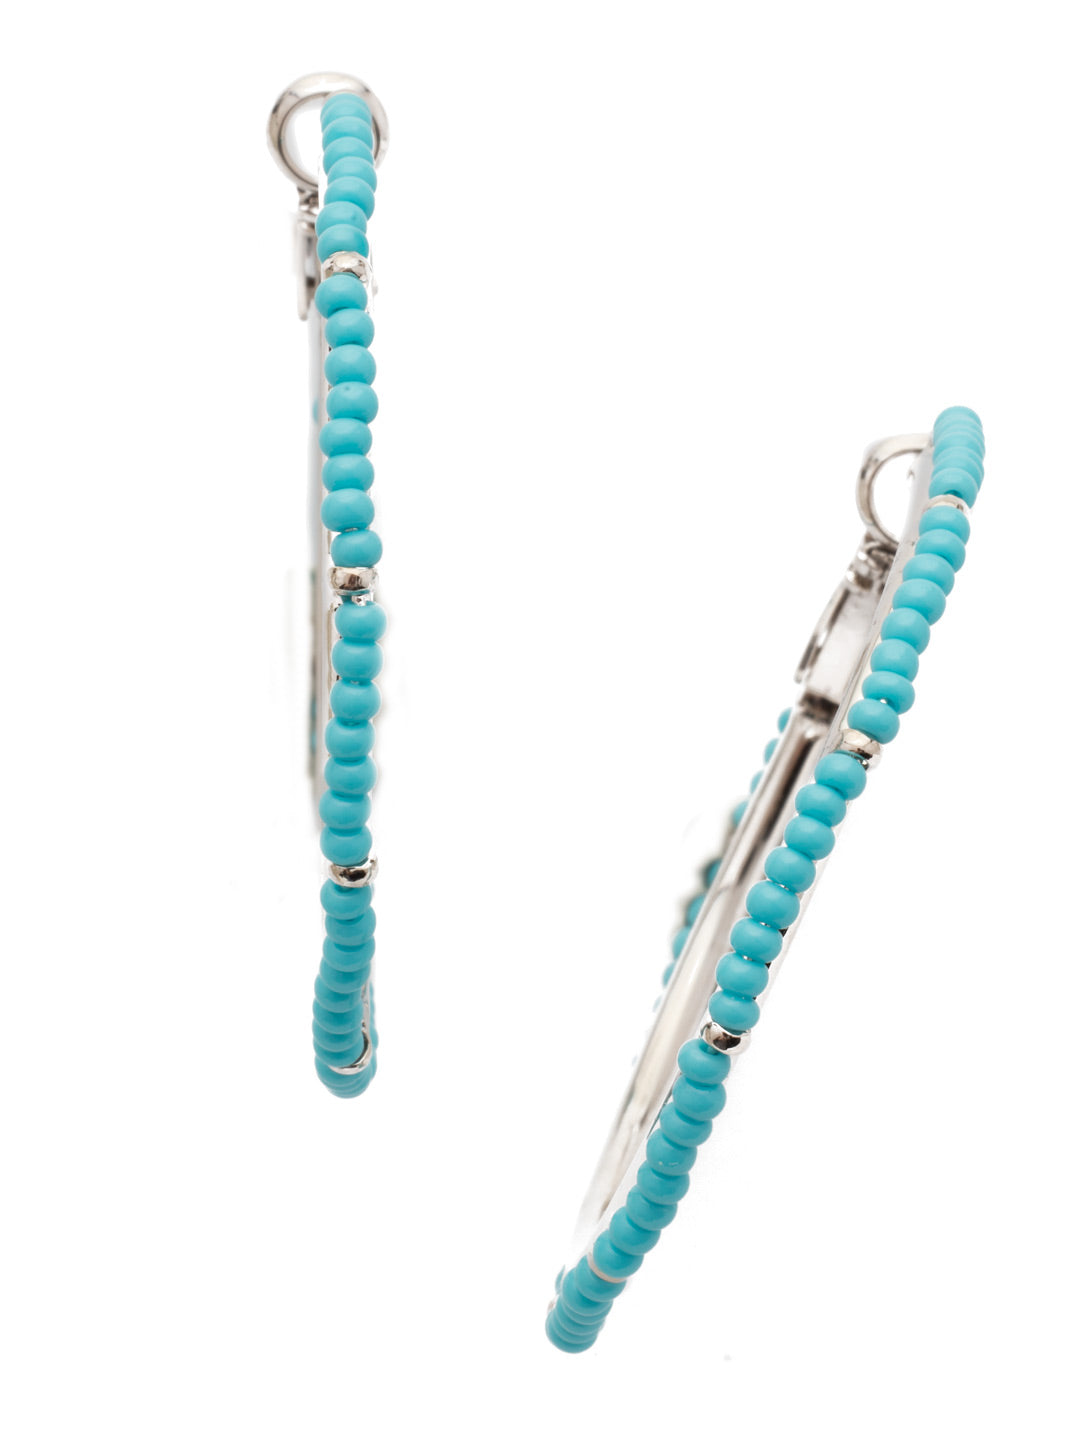 Elena Hoop Earrings - EEC12RHTHT - <p>Quite the polished pair! These slender hoops are embellished with petite beads for an elegant addition. From Sorrelli's Tahitian Treat collection in our Palladium Silver-tone finish.</p>